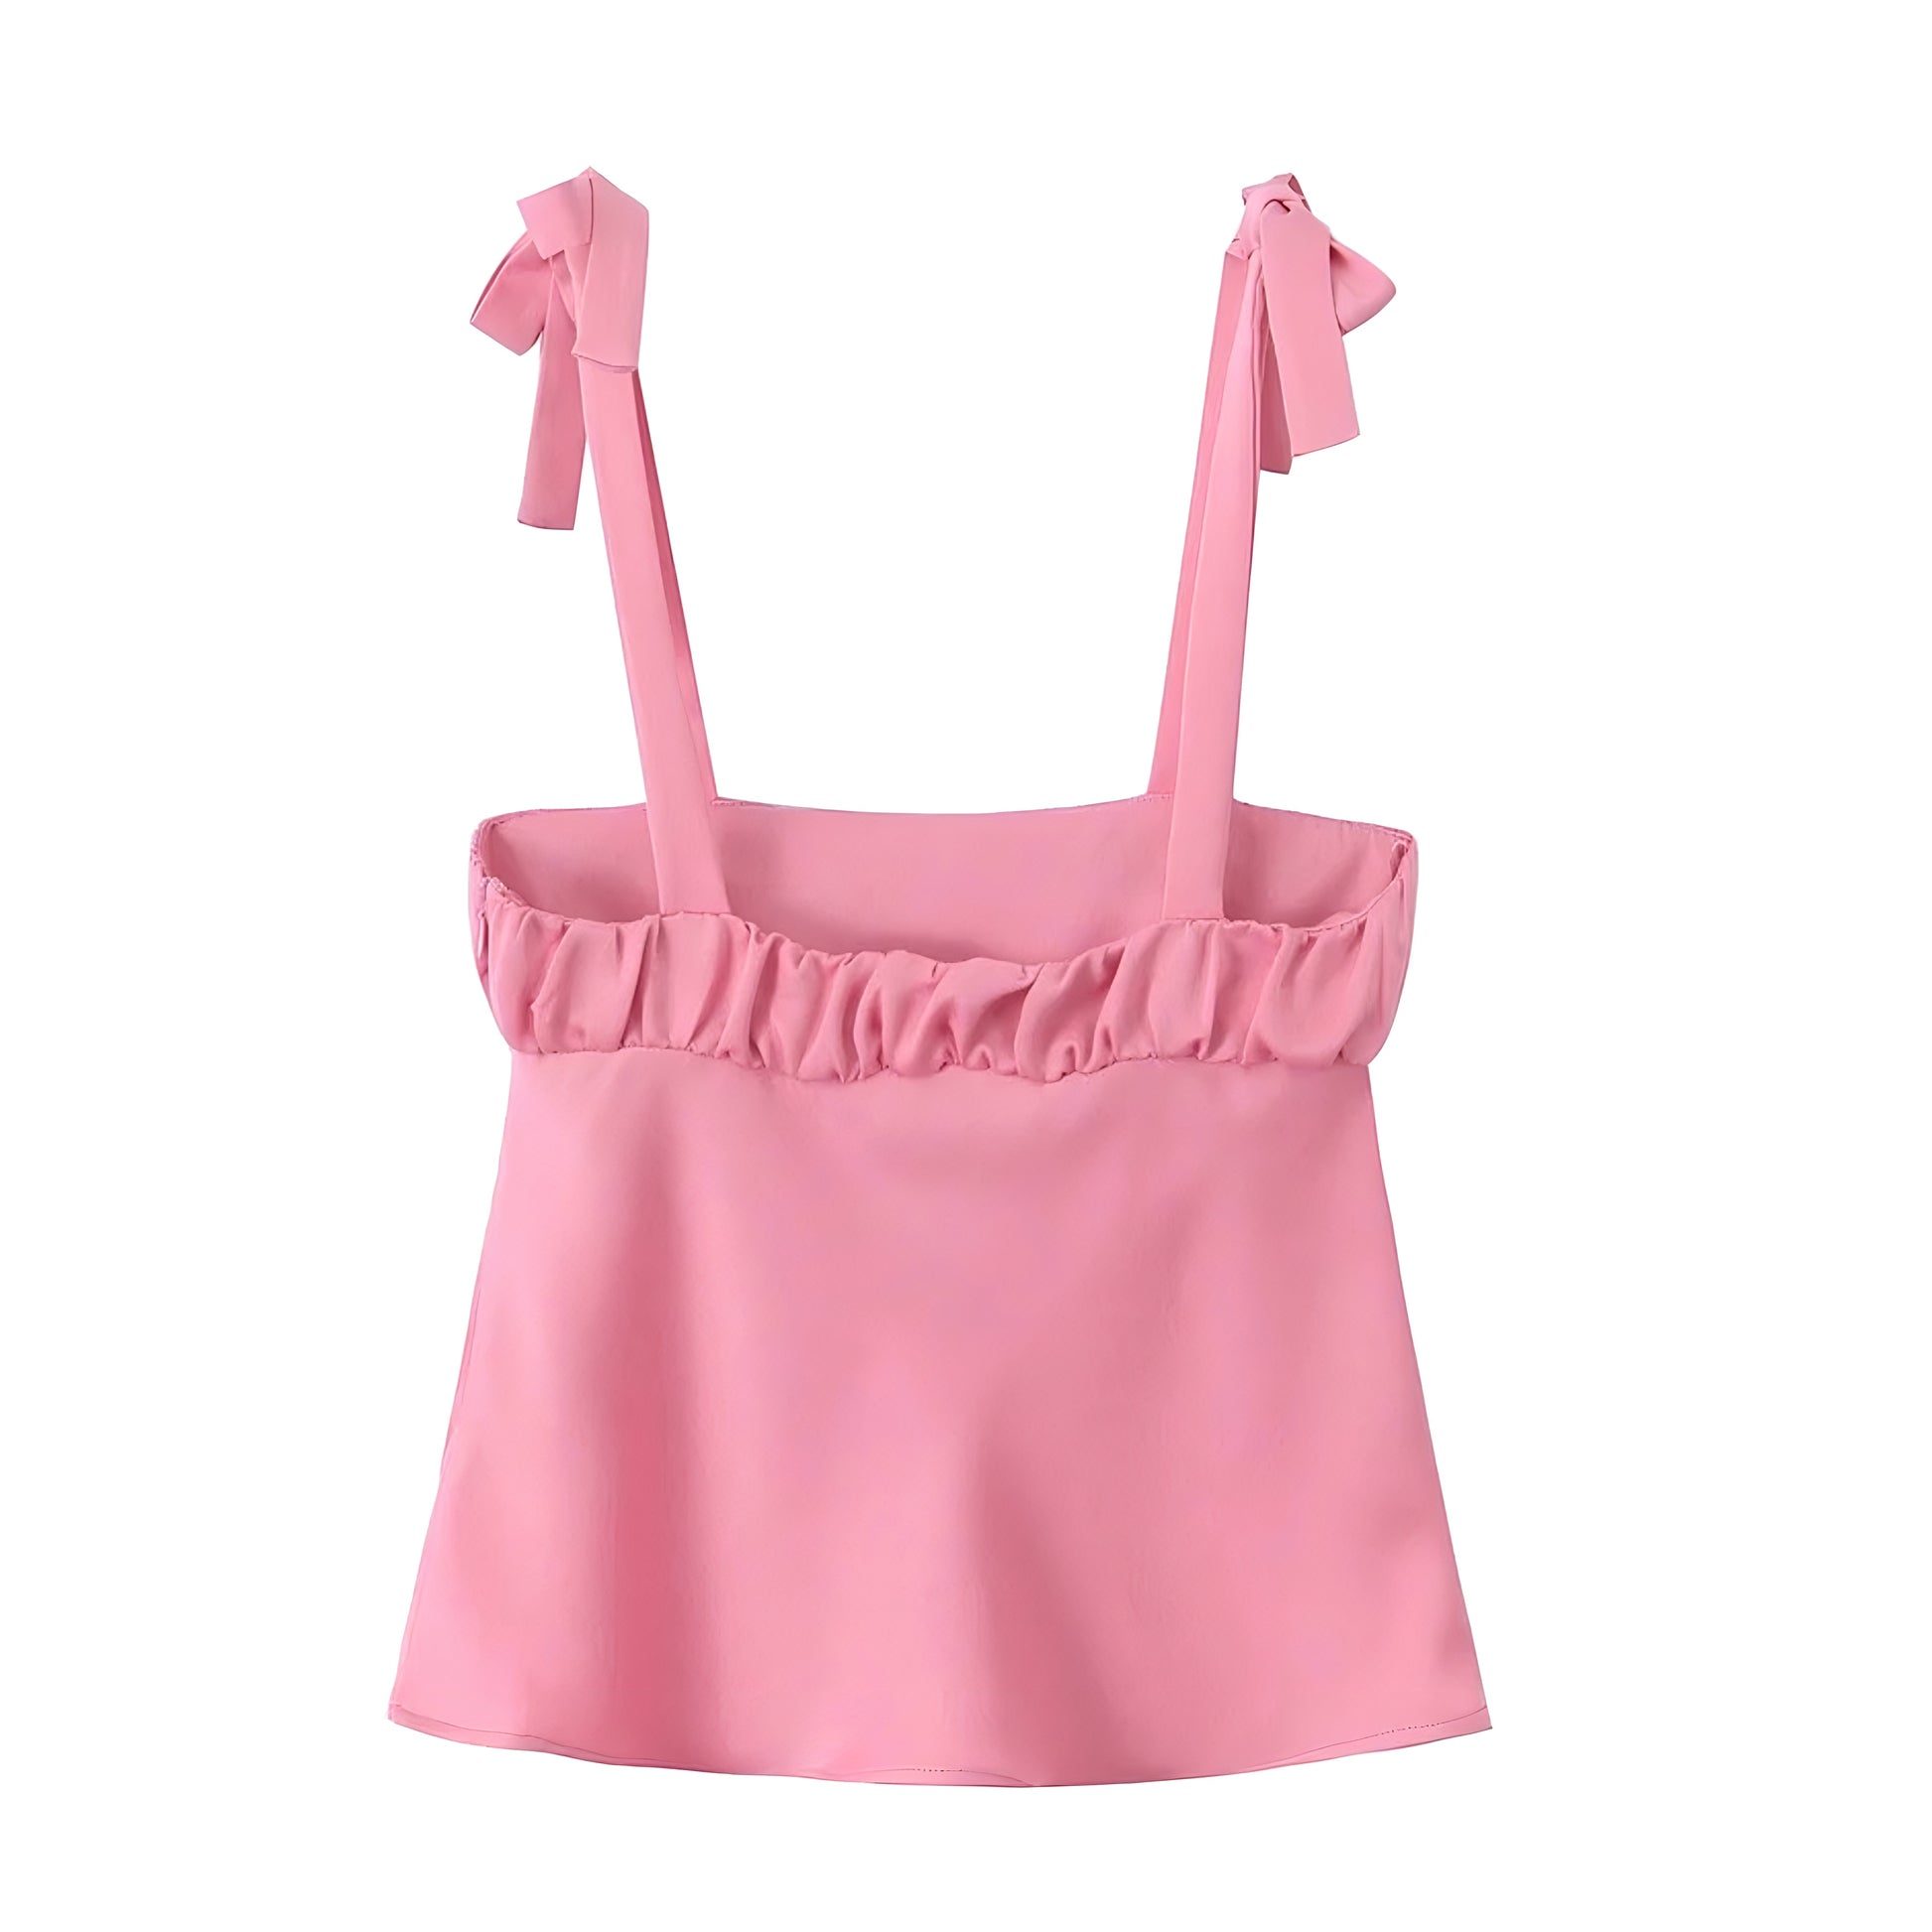 light-bright-pink-slim-fit-ruched-smocked-sleeveless-spaghetti-strap-bow-backless-open-back-tiered-boho-bohemian-full-length-hip-camisole-crop-tank-top-blouse-shirt-women-ladies-teens-tweens-chic-trendy-spring-2024-summer-elegant-casual-semi-formal-feminine-classy-preppy-beach-wear-stockholm-style-tops-zara-urban-outfitters-aritzia-revolve-brandy-melville-altard-state-dupe